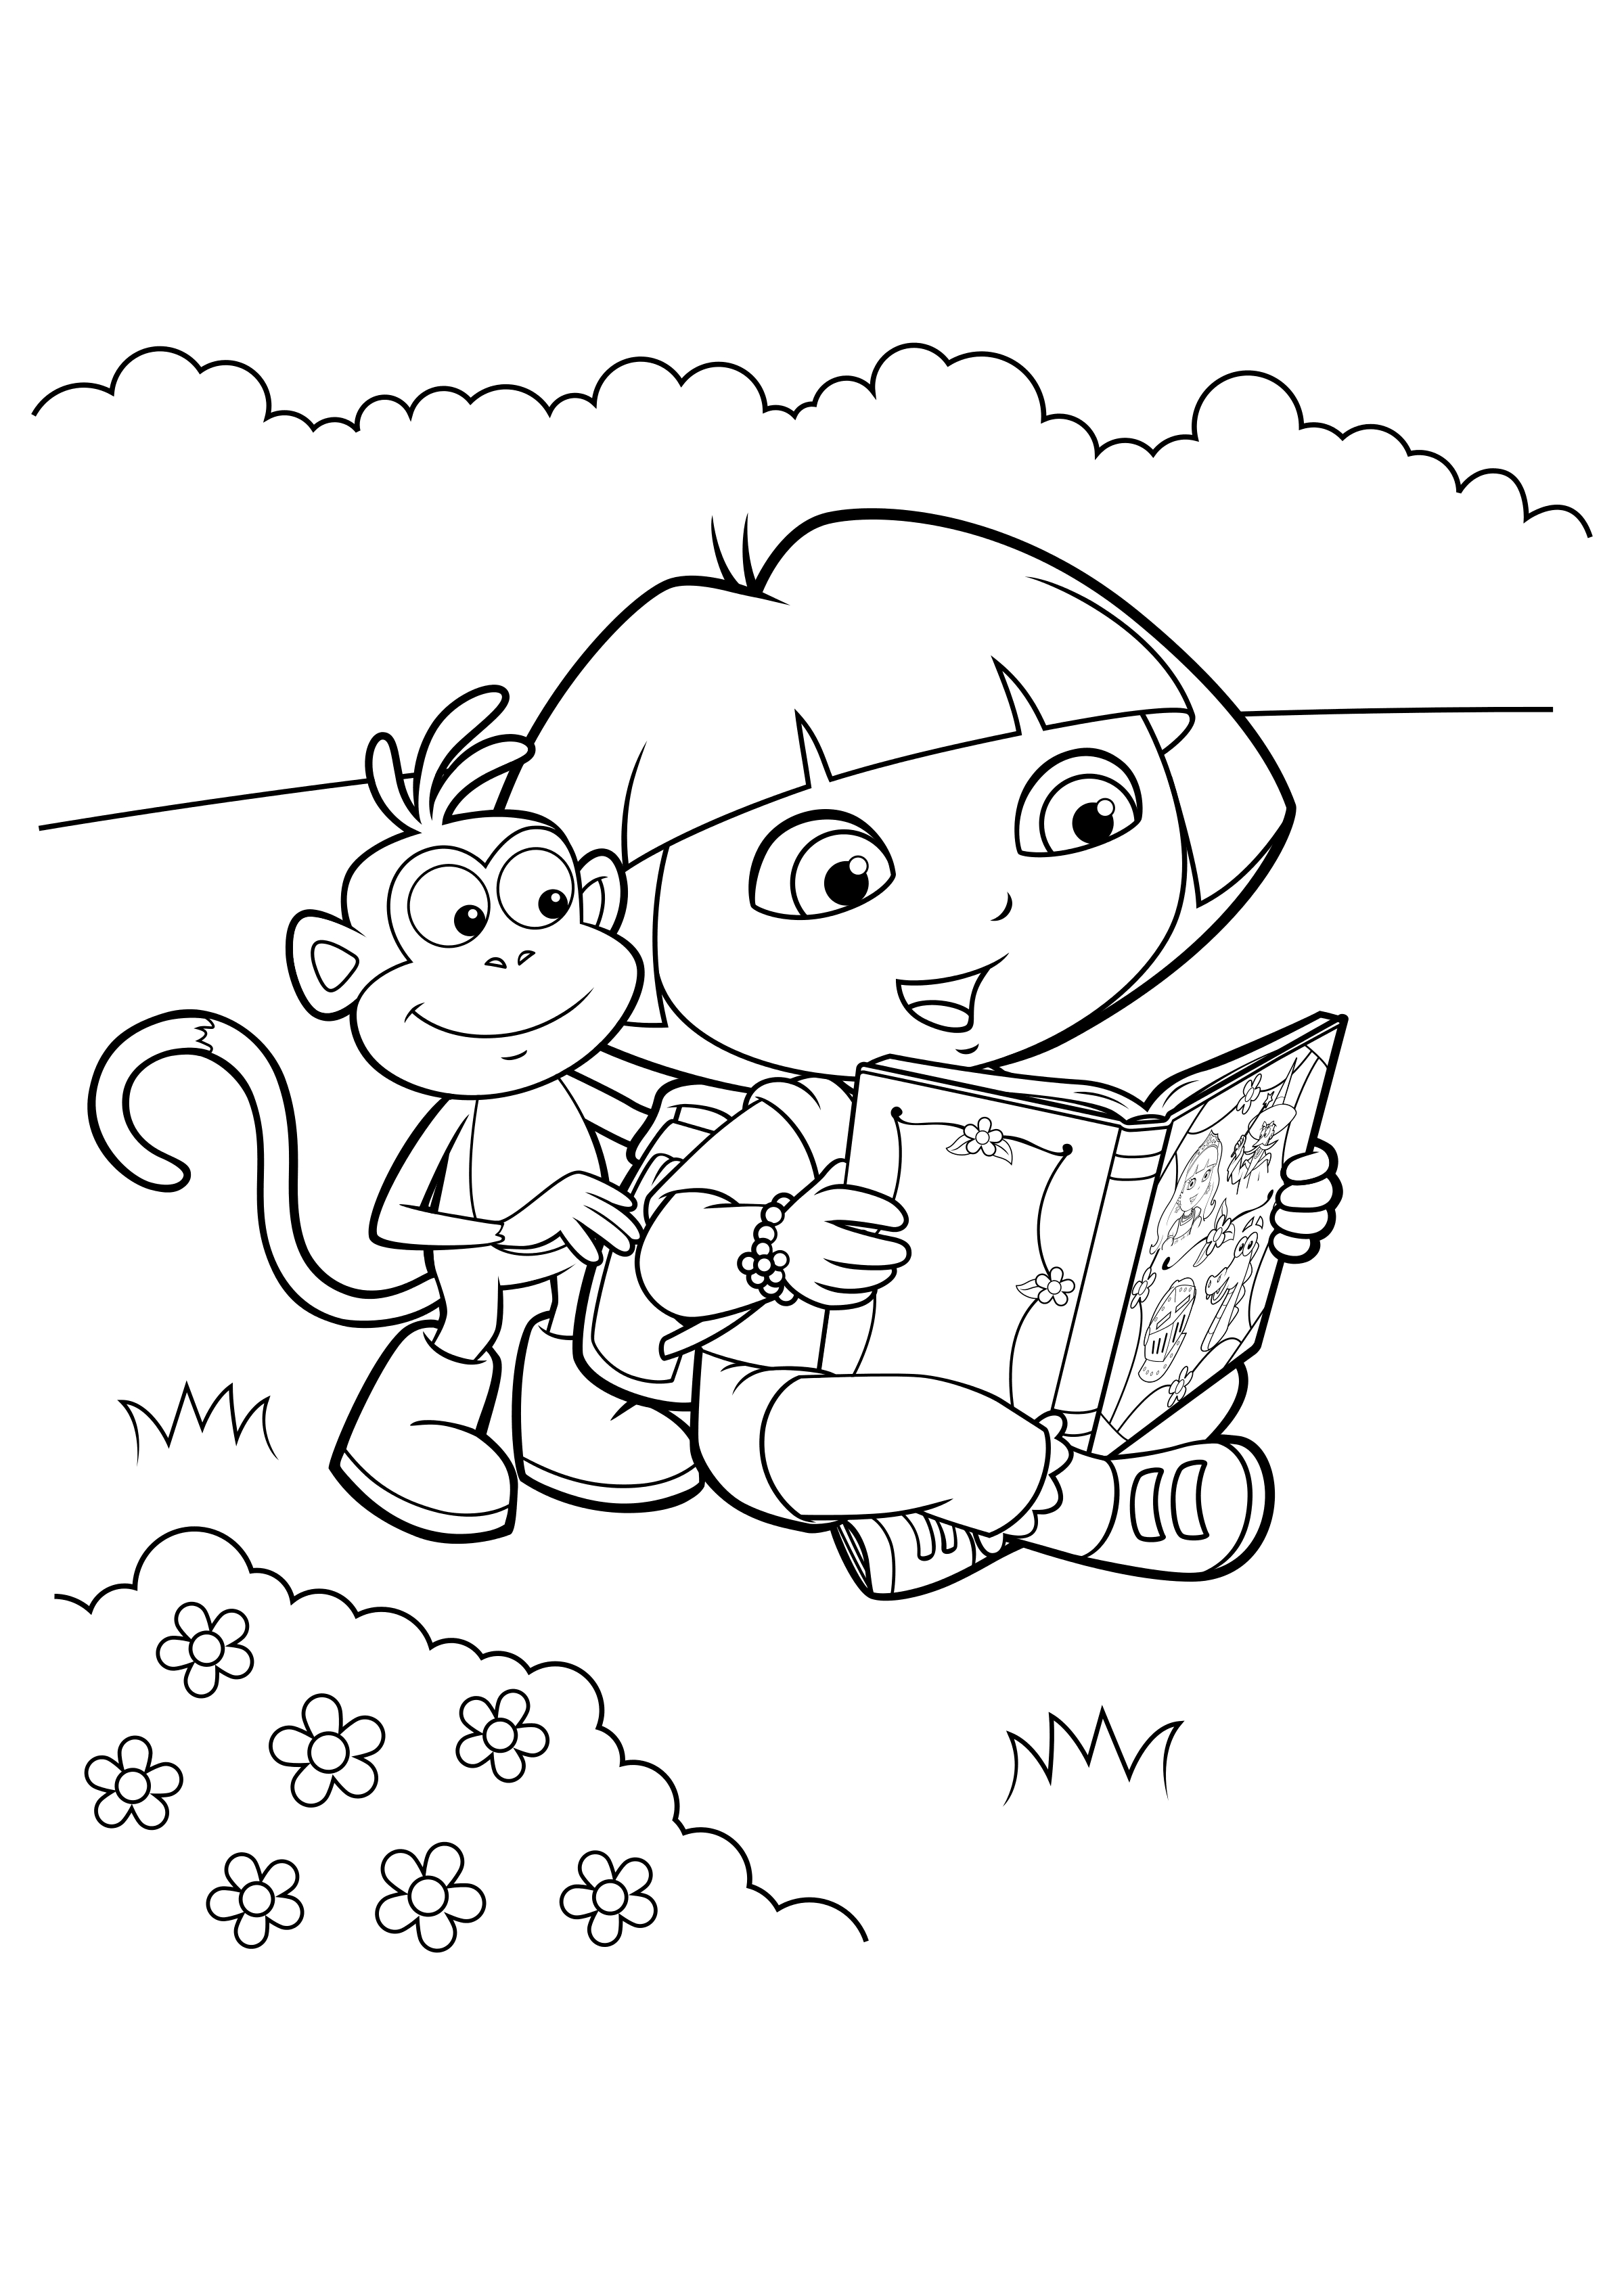 Coloring page Dora the Explorer Dora and Boots are reading a book